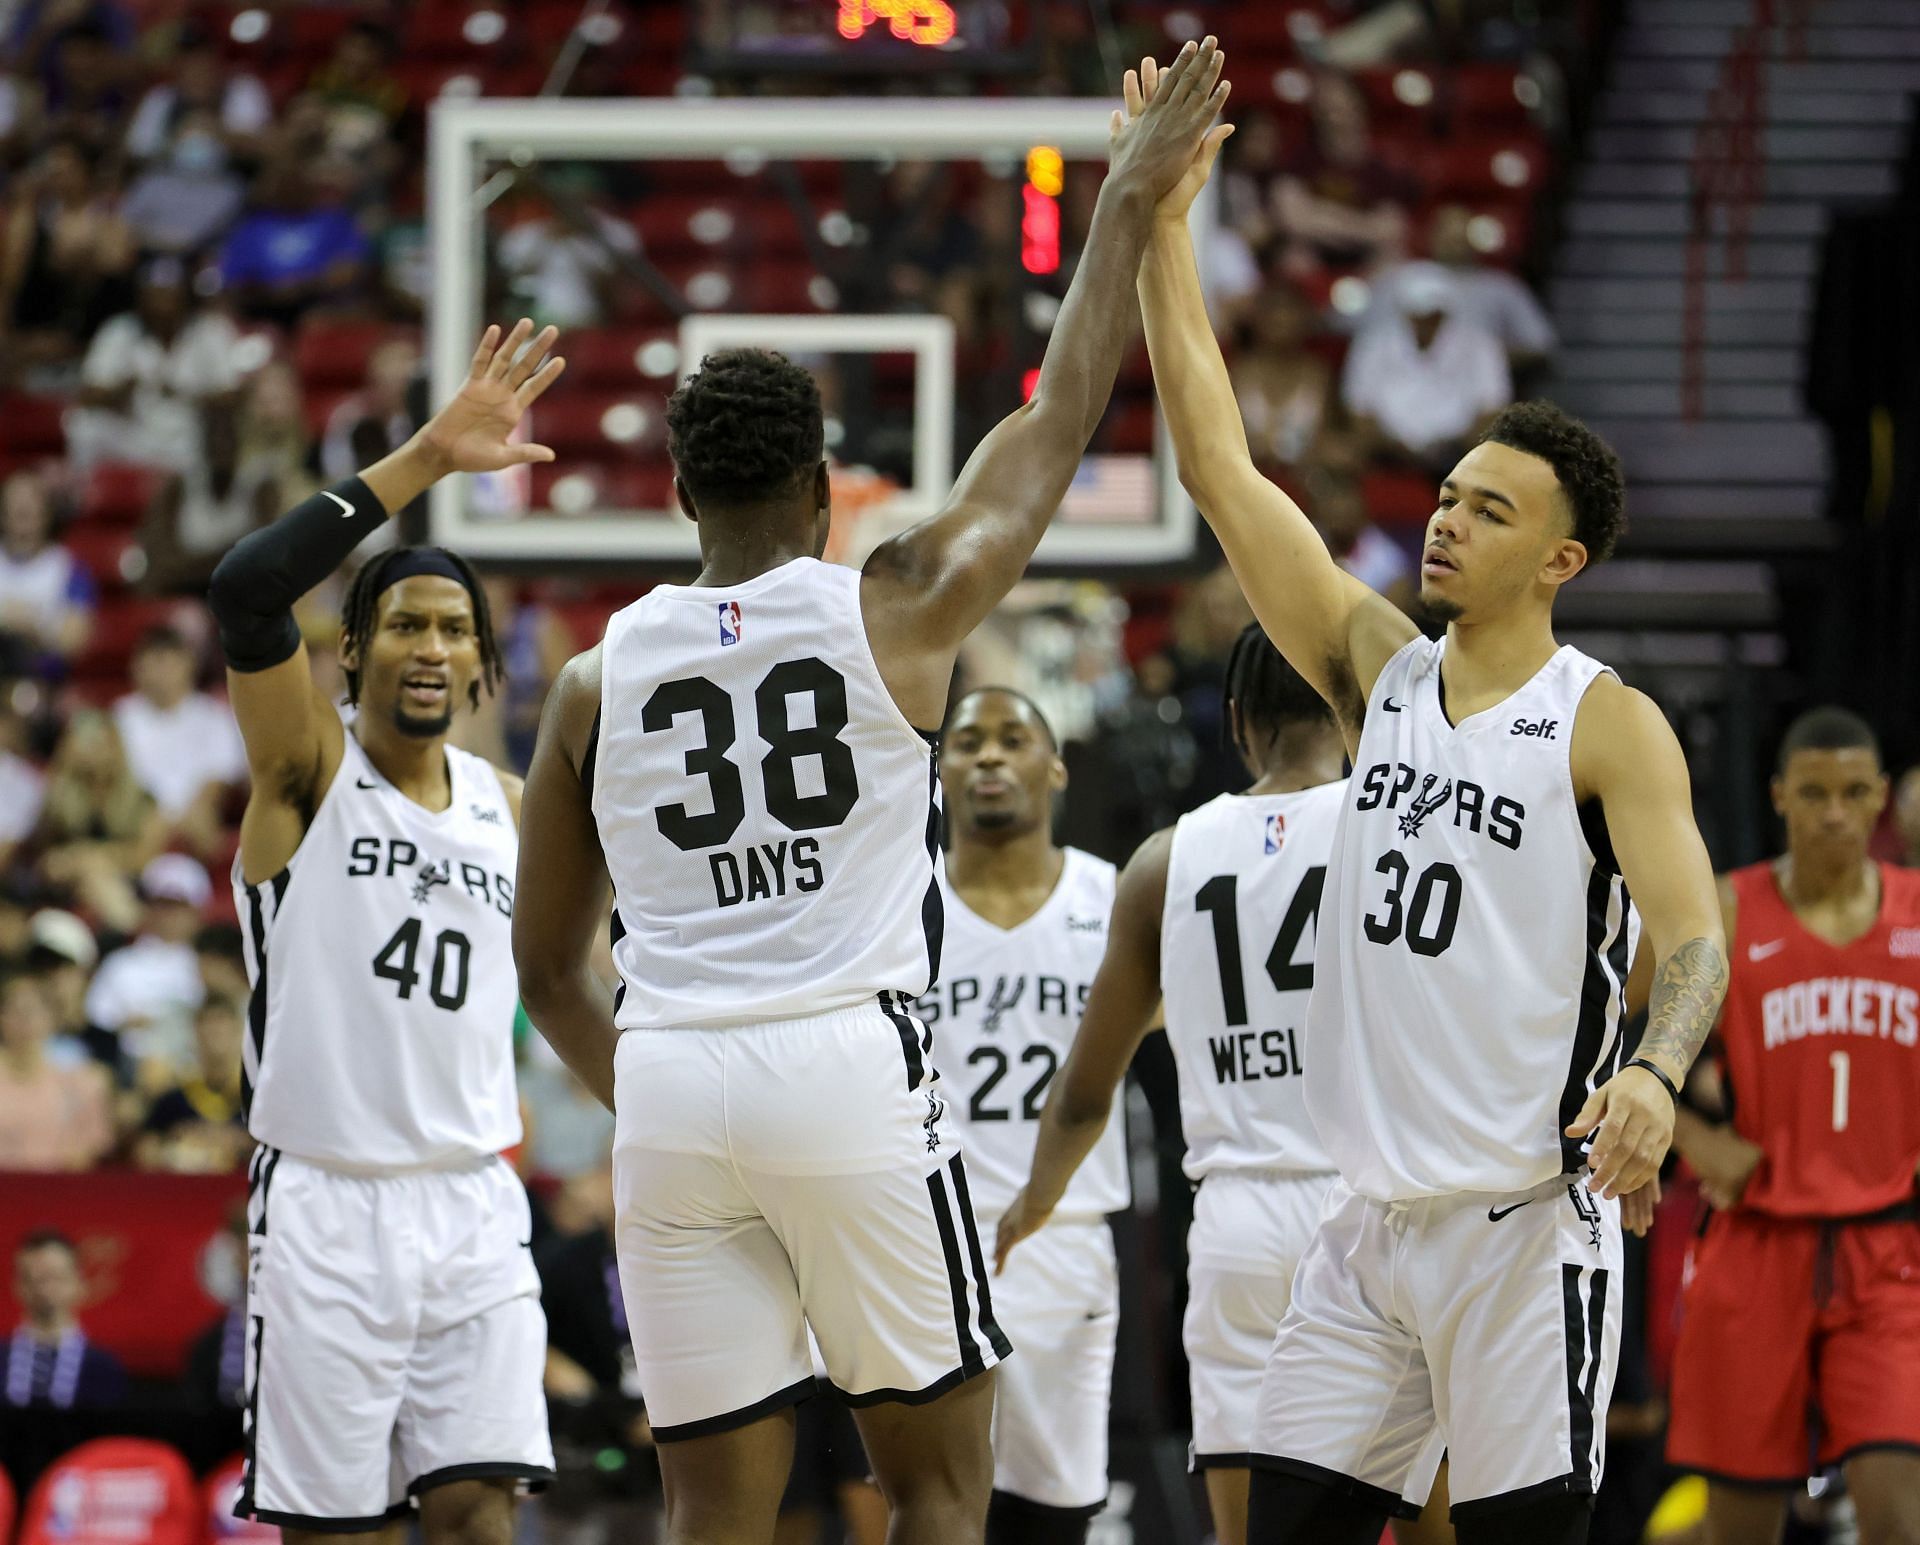 The Spurs came close to registering a win against the Rockets